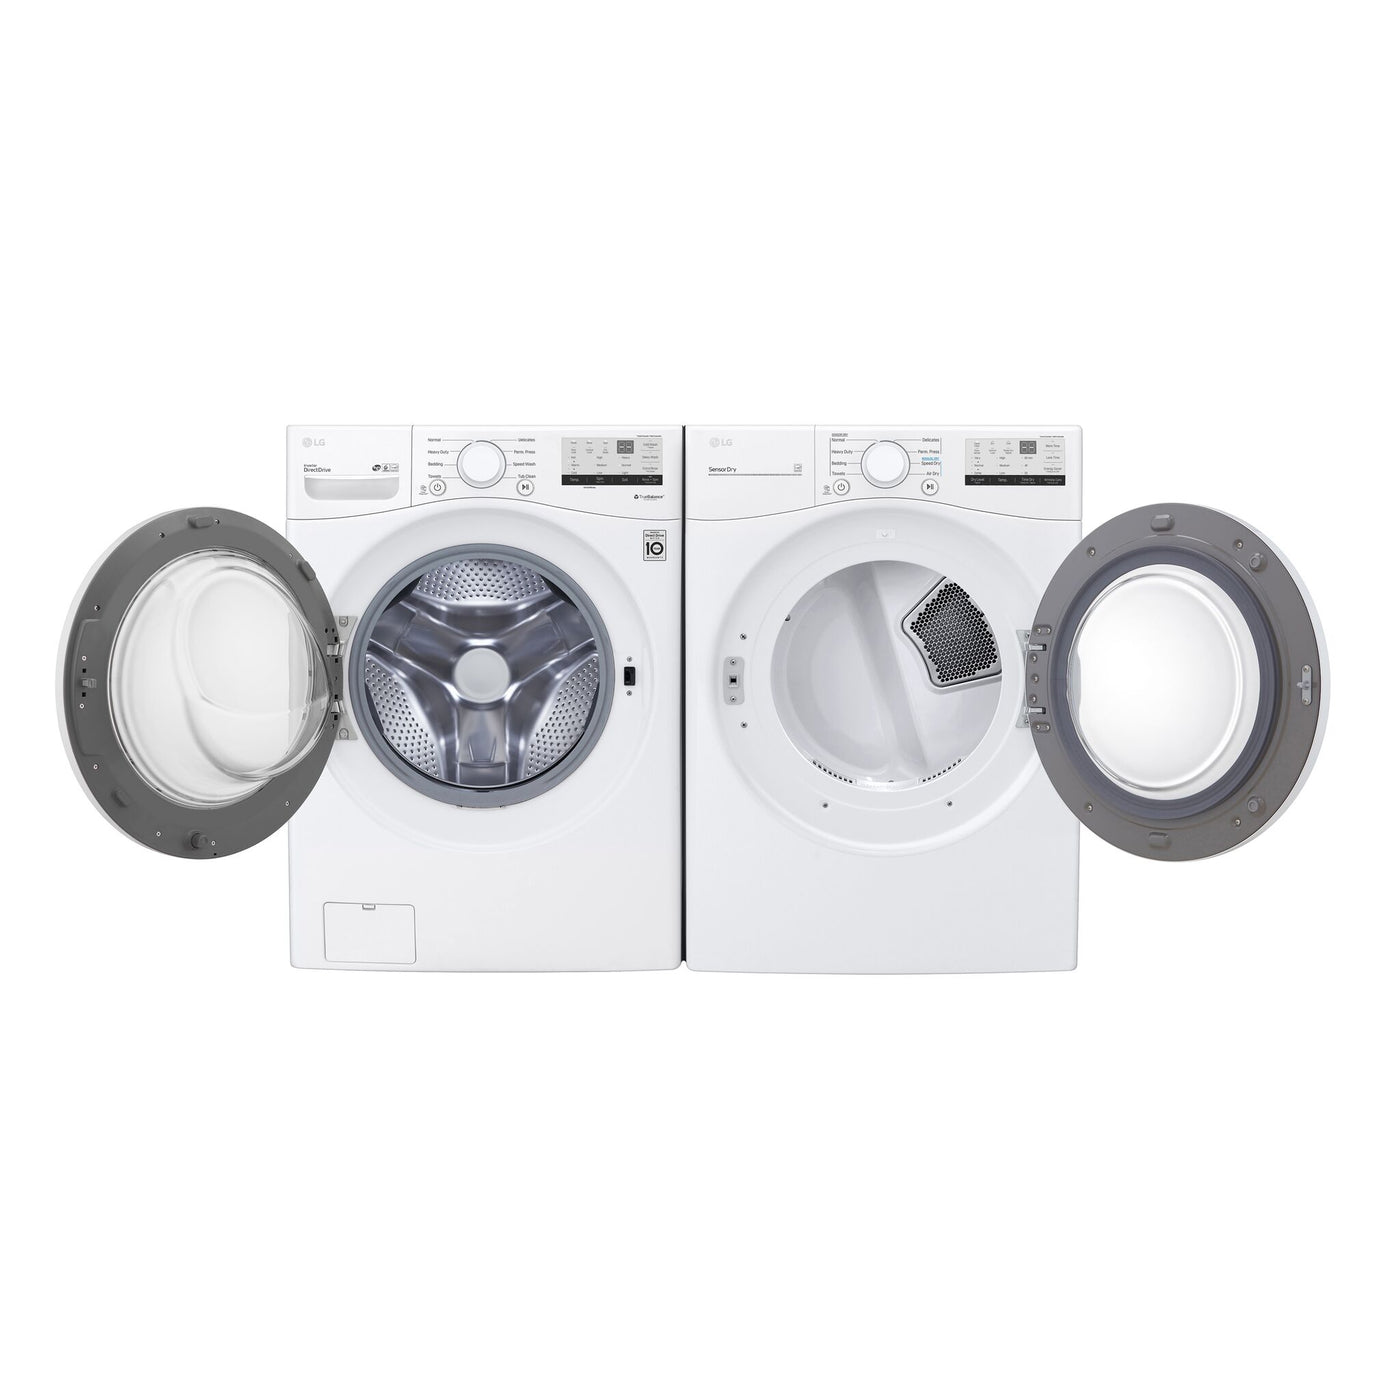 LG White Front Load Dryer with Ultra Large Capacity (7.4 Cu.Ft) - DLE3400W